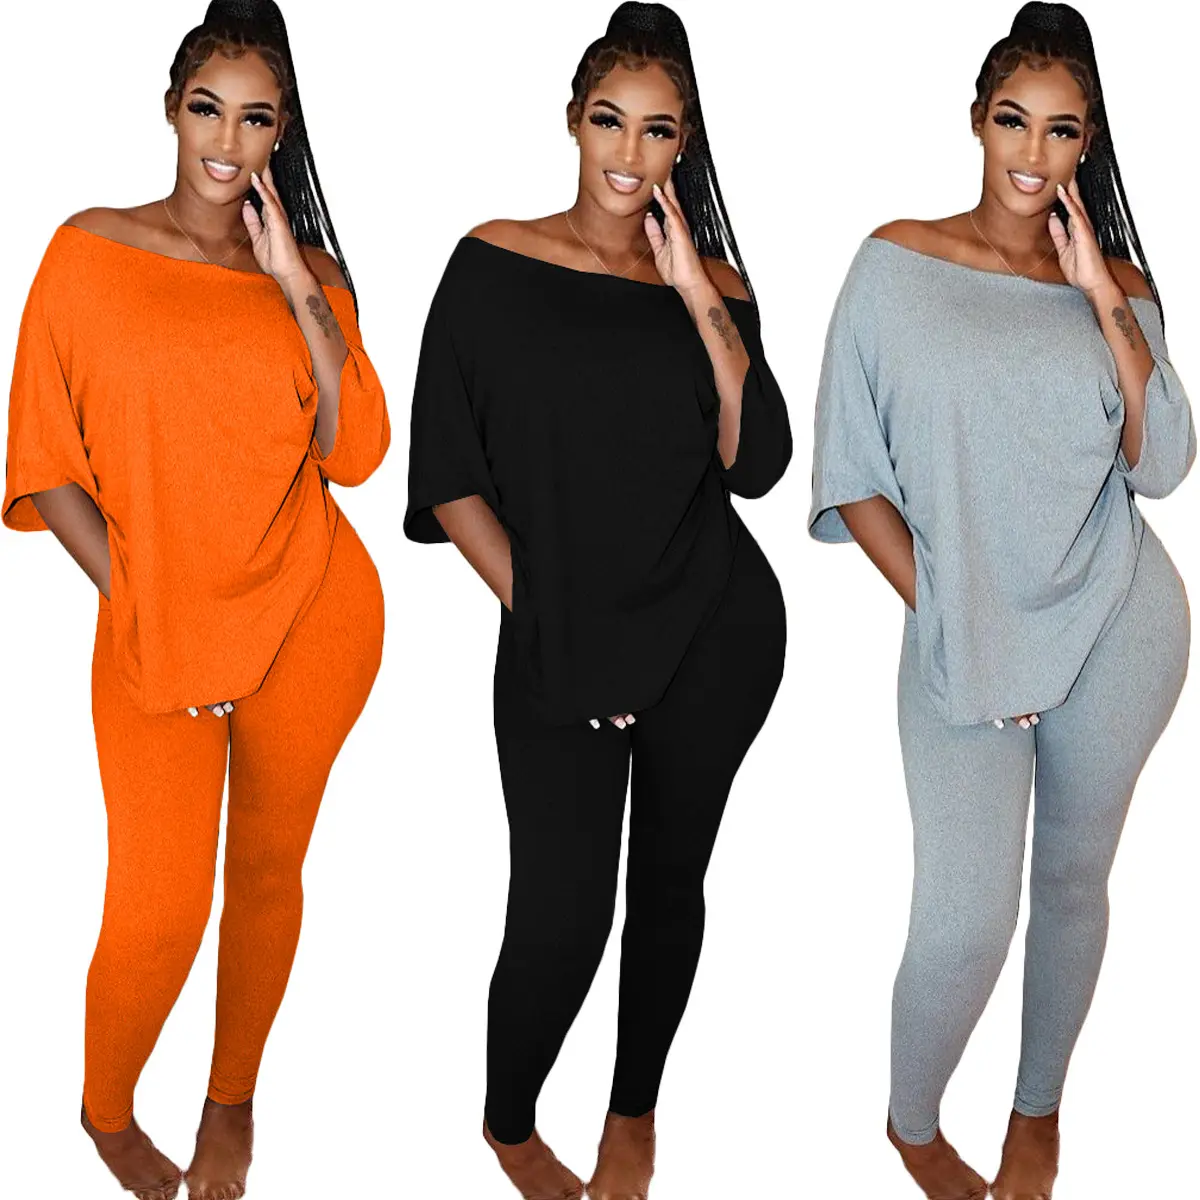 2021 Fall custom sweatsuit casual women clothing sexy off shoulder backless top and long pants two piece set tracksuits